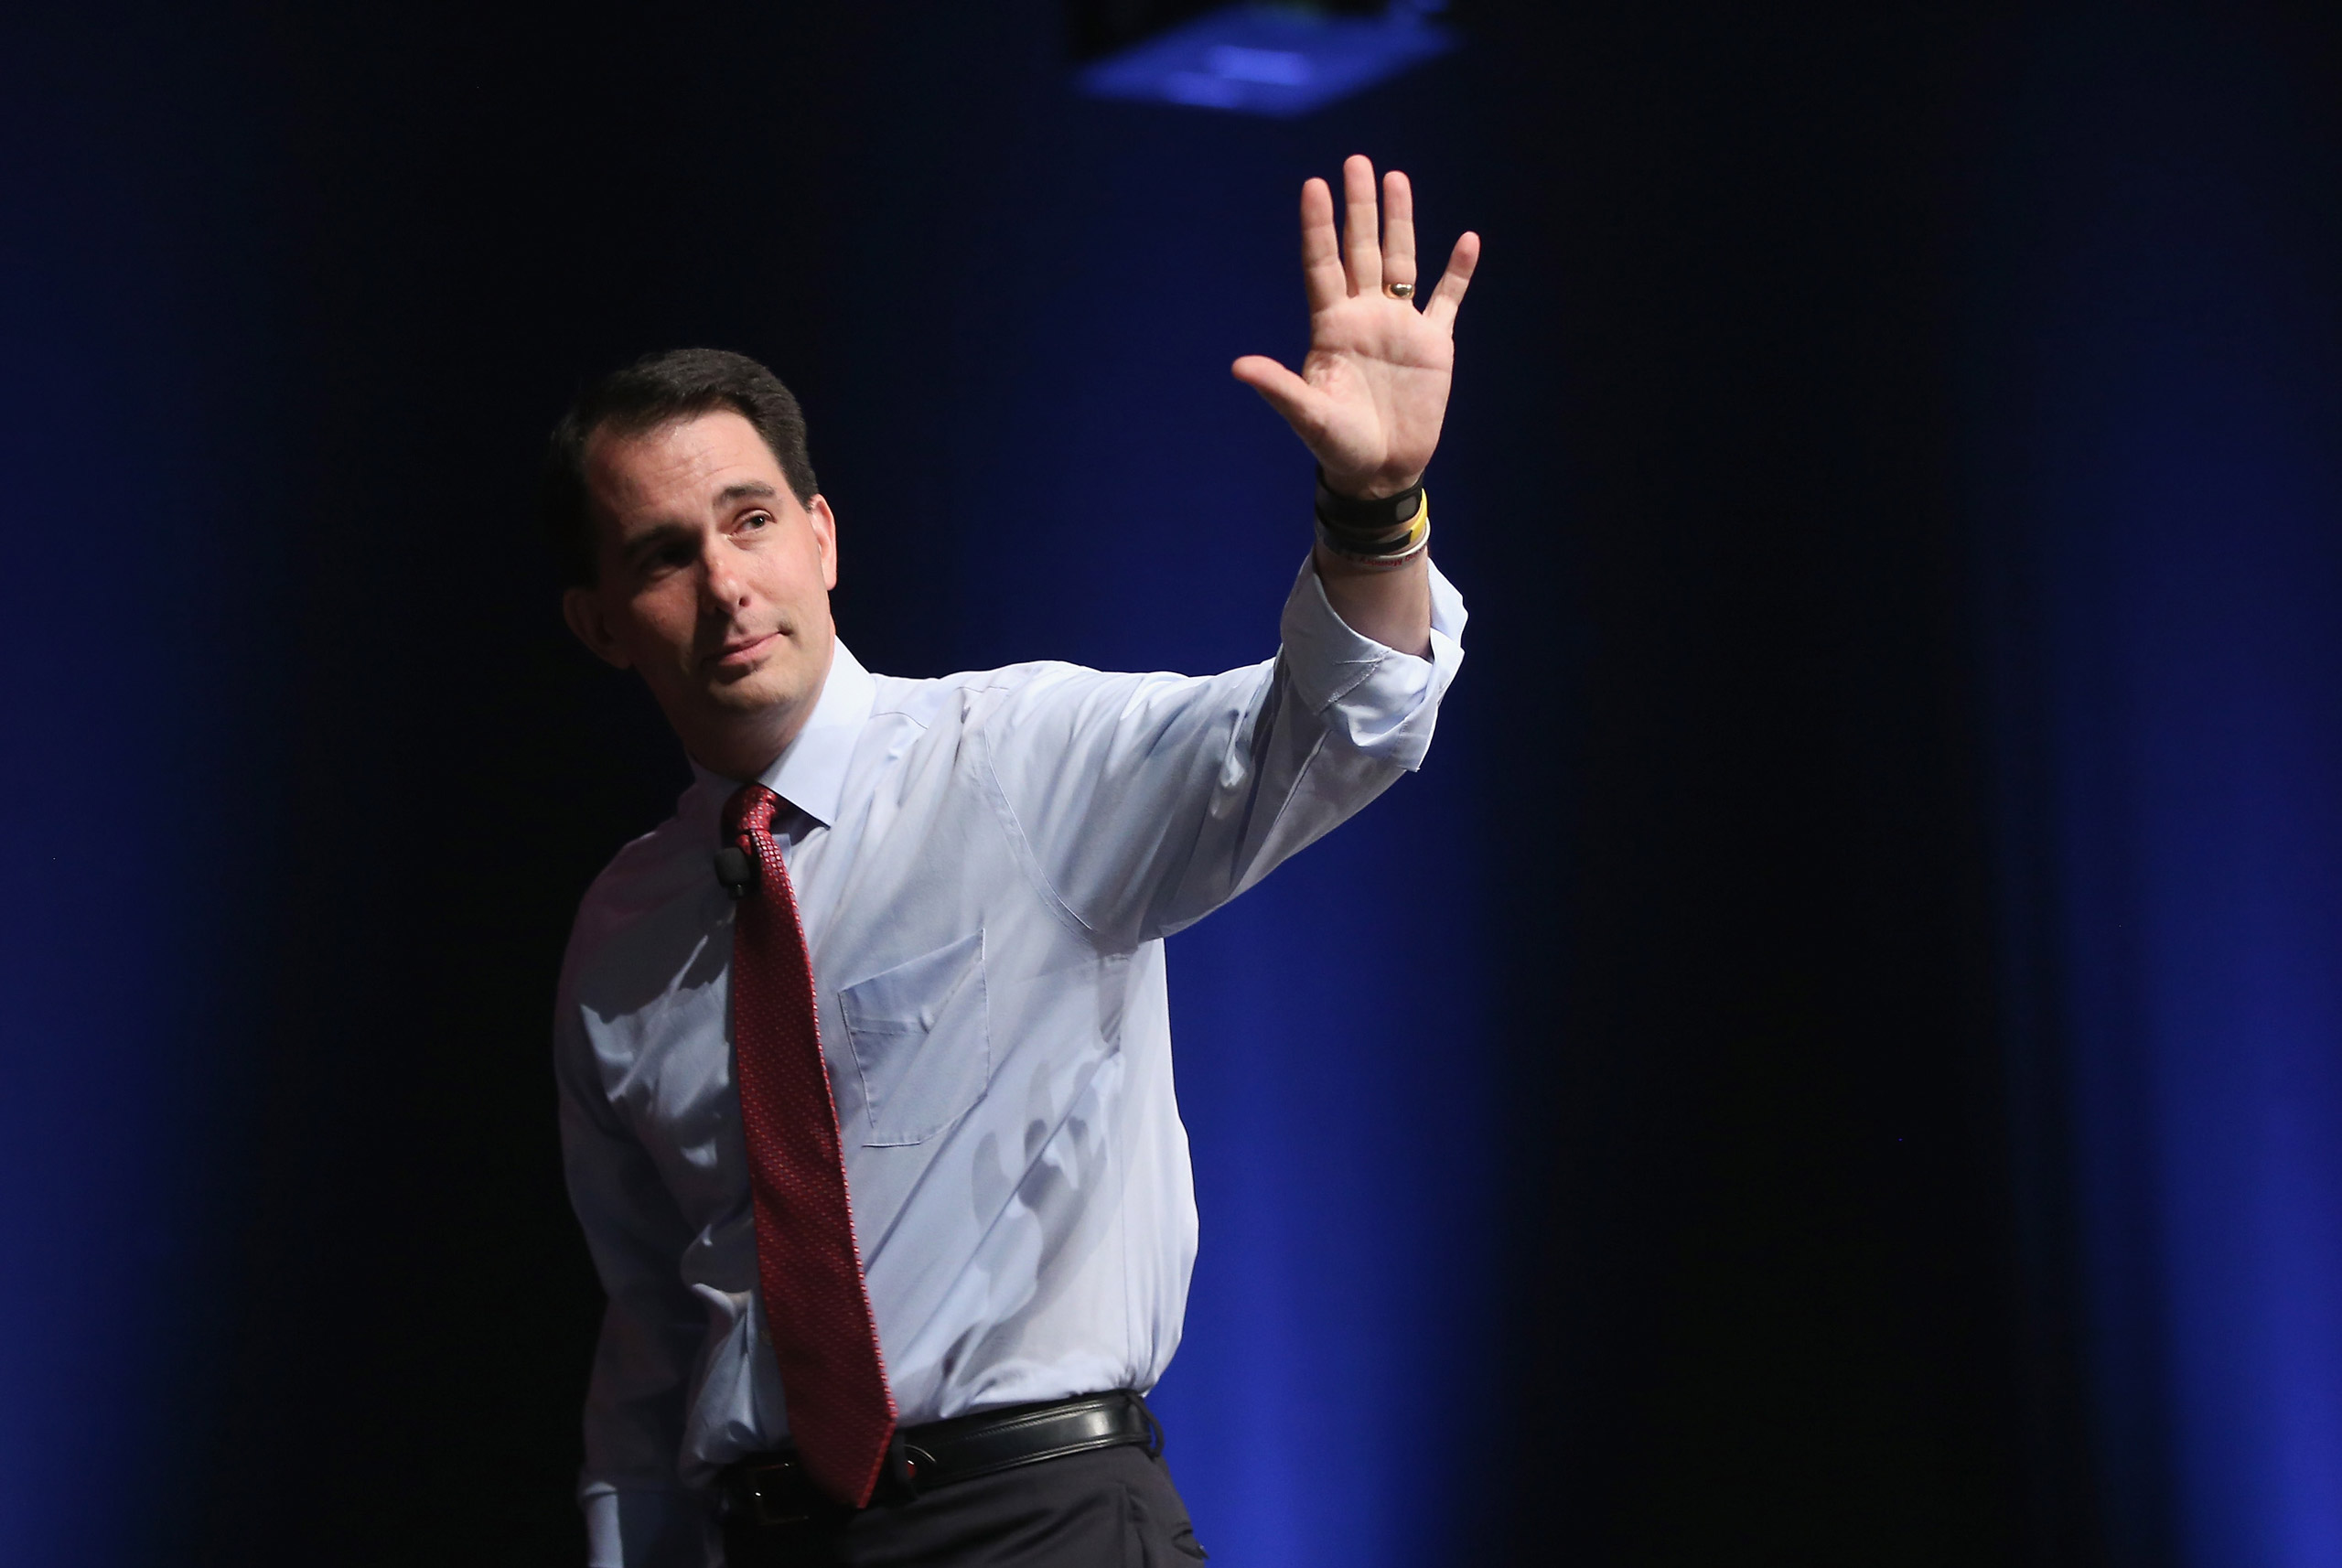 AMES, IA - JULY 18:  Republican presidential candidate Wisconsin Governor Scott Walker greets guests at The Family Leadership Summit at Stephens Auditorium on July 18, 2015 in Ames, Iowa. According to the organizers, the purpose of The Family Leadership Summit is to inspire, motivate, and educate conservatives.  (Photo by Scott Olson/Getty Images)